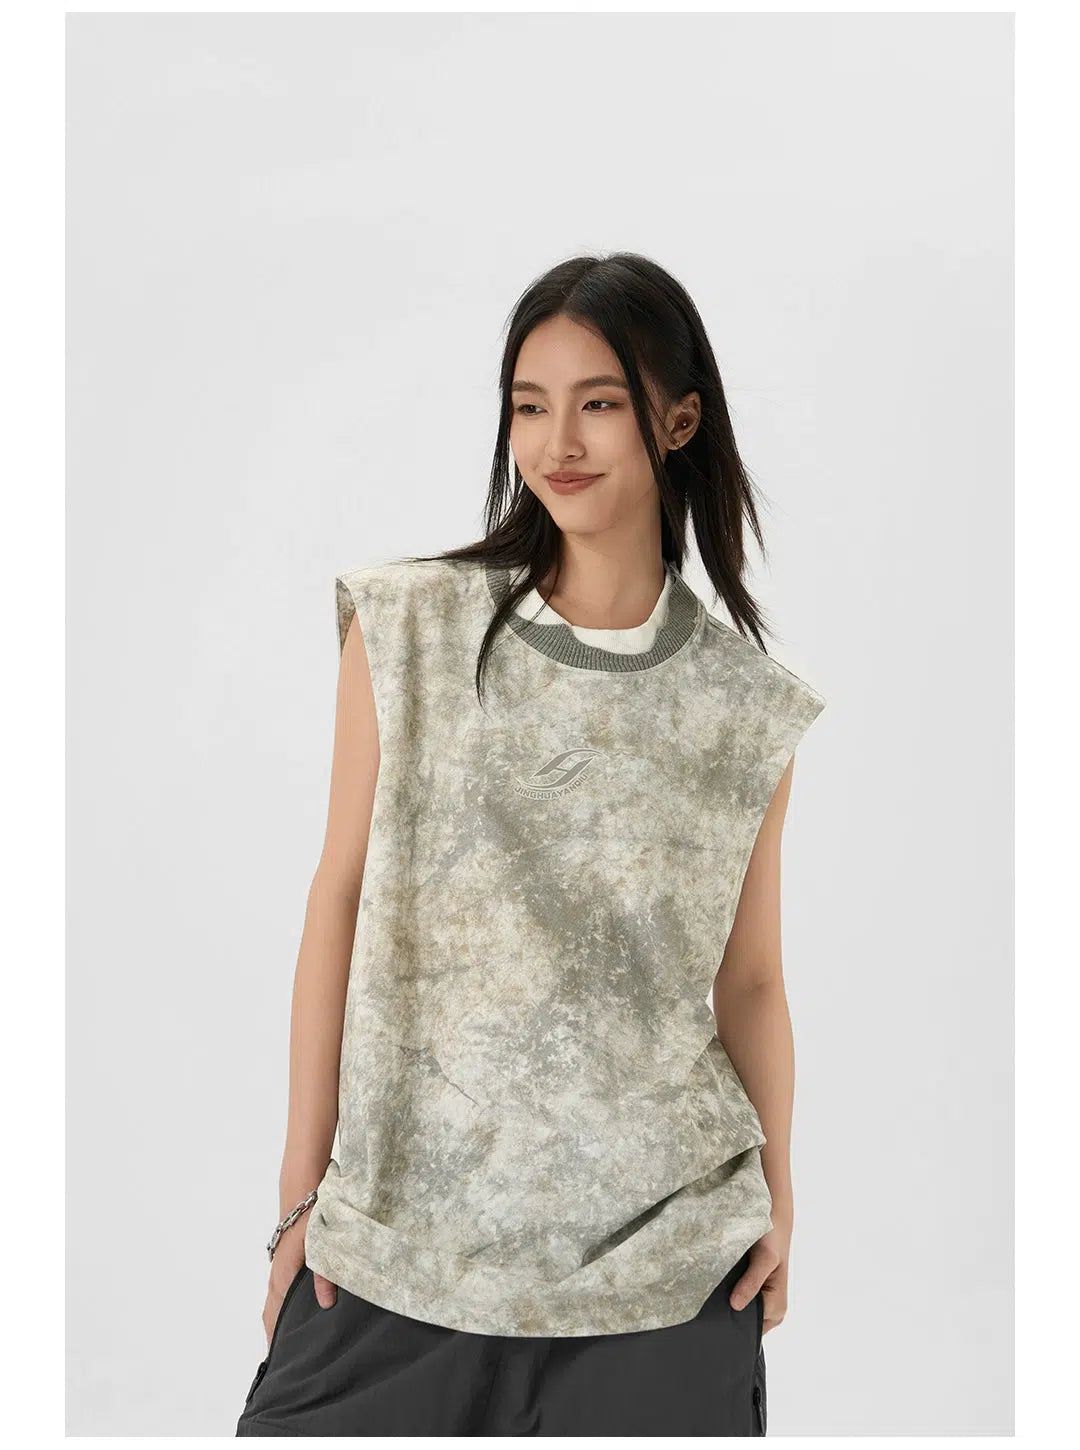 Light Washed Camo Tank Top Korean Street Fashion Tank Top By JHYQ Shop Online at OH Vault